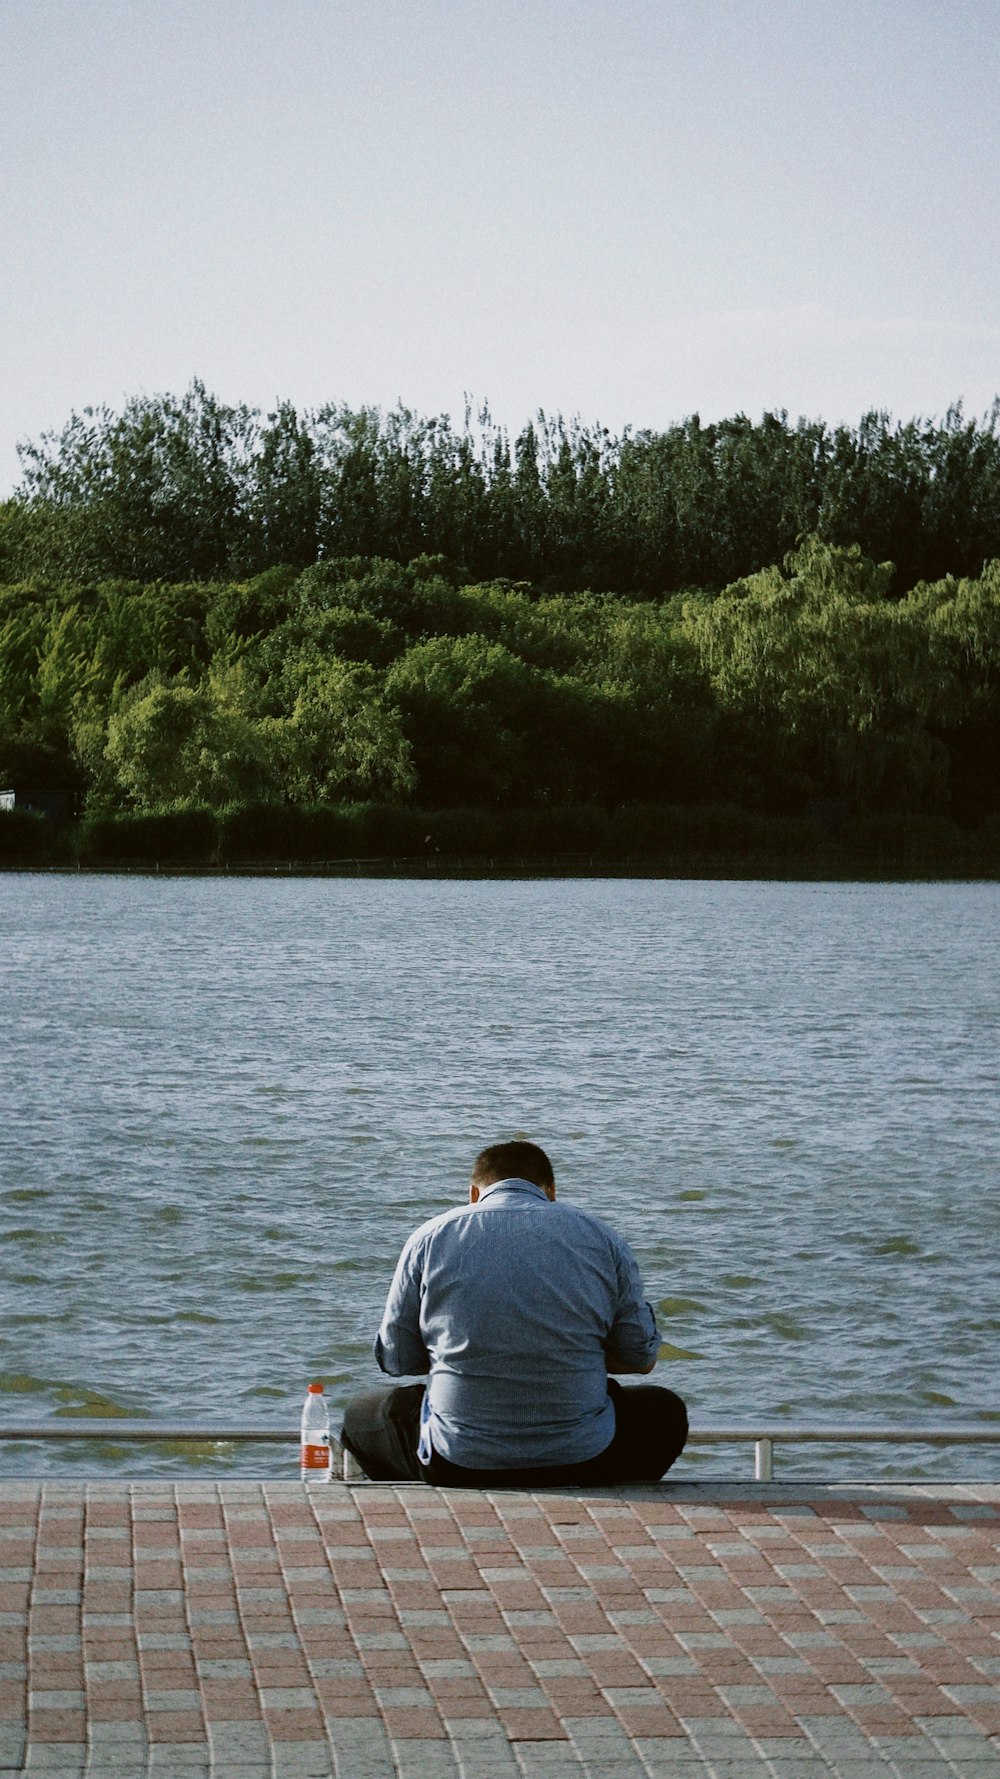 man in blue shirt sitting on rock in front of body of water during daytime